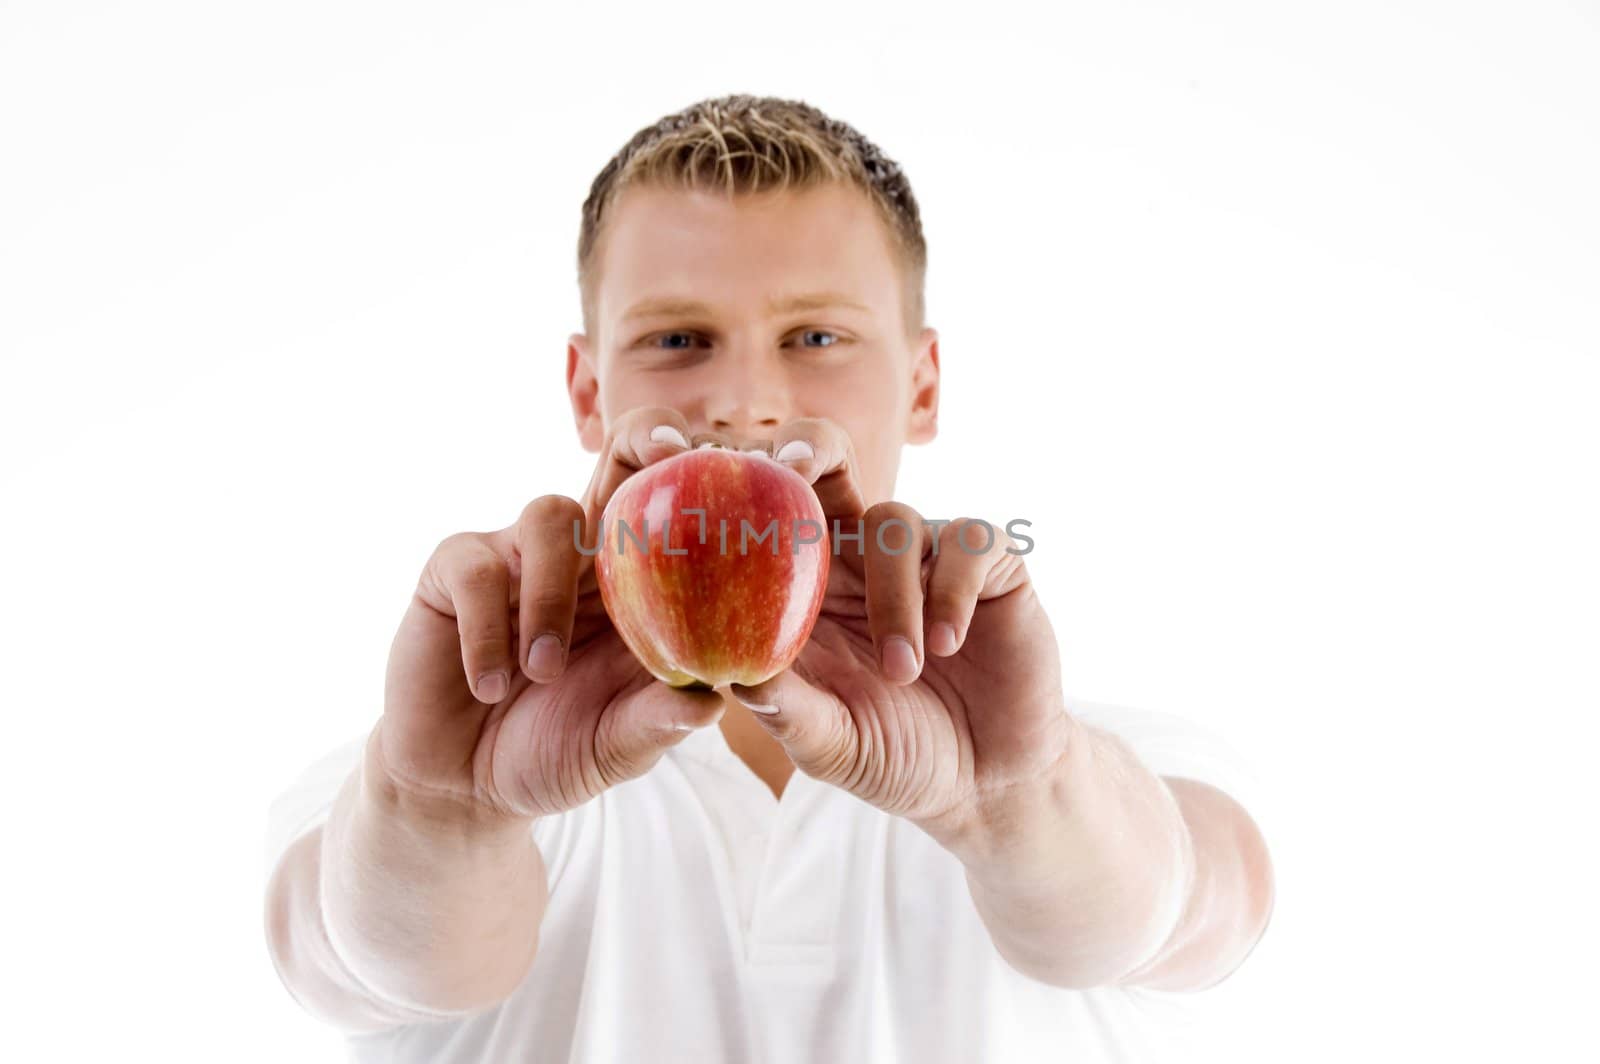 male holding apple with both hands on an isolated background